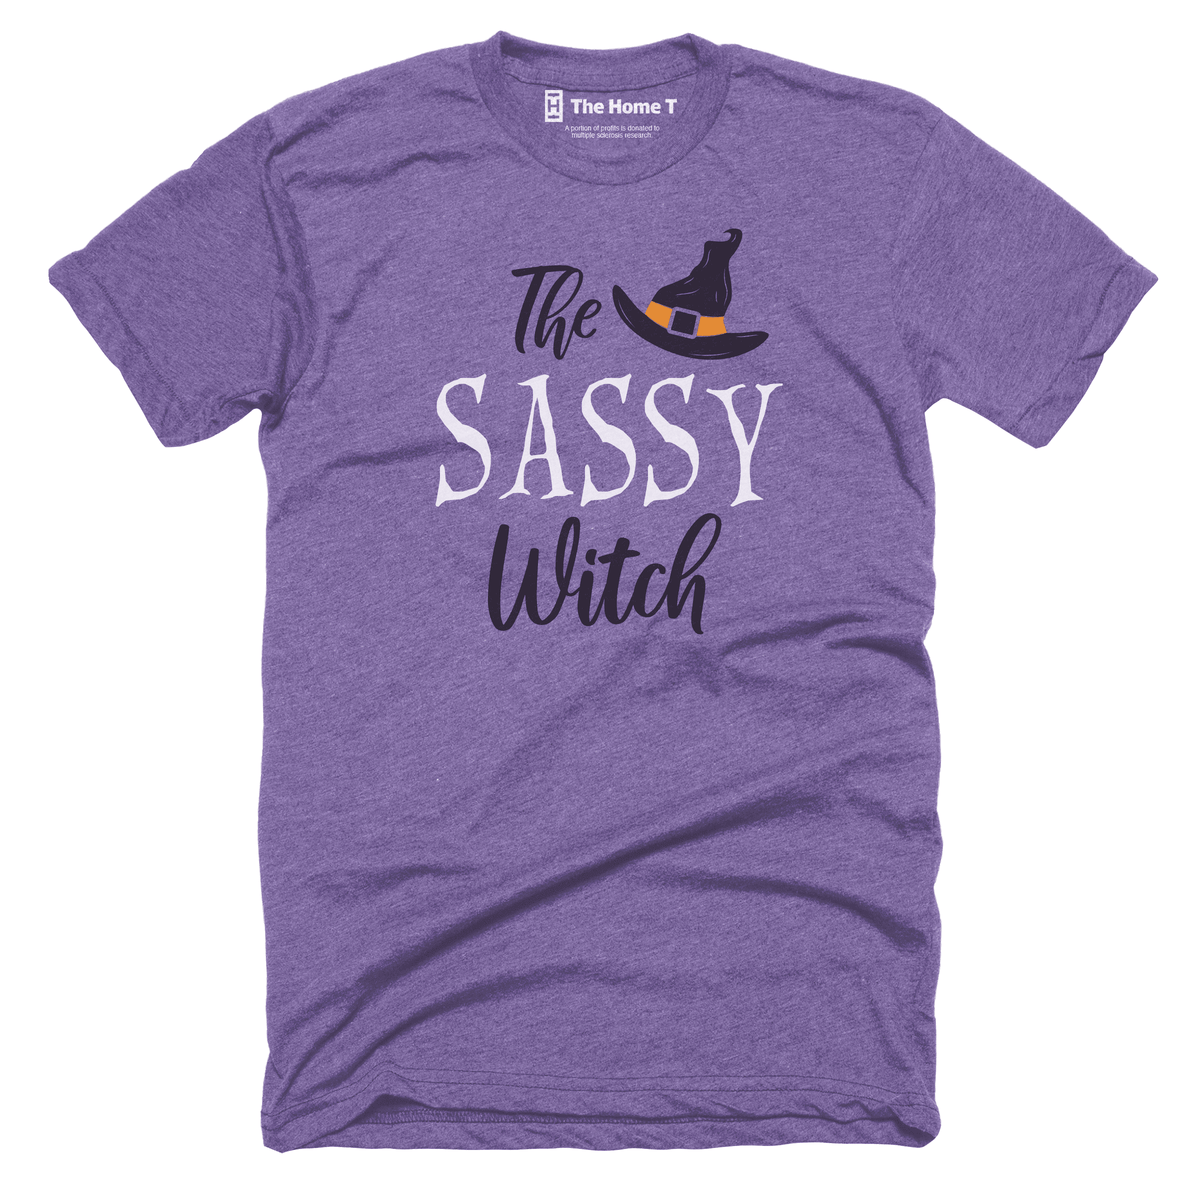 The Sassy Witch